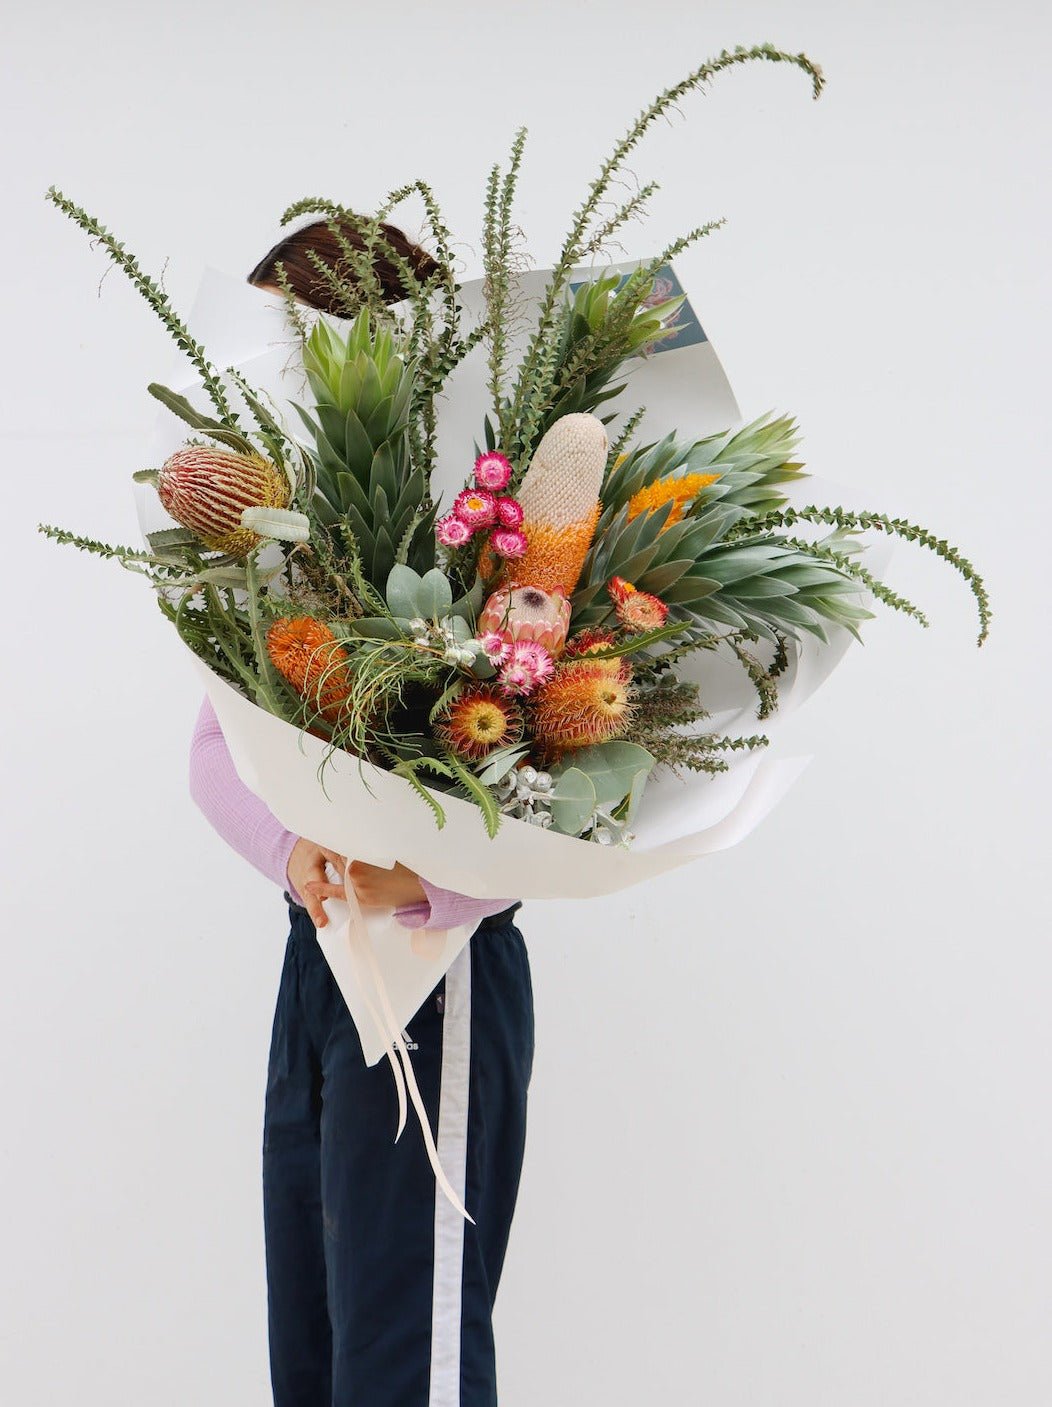 An amazing sized seasonal native bouquet. The pictured bouquet includes a variety of banksias (6 total), large silver leucadendrons, knife wattle, gum/eucalyptus foliage, a protea and strawflowers. The bouquet is gift wrapped in white paper and is tied with a light pink ribbon.  